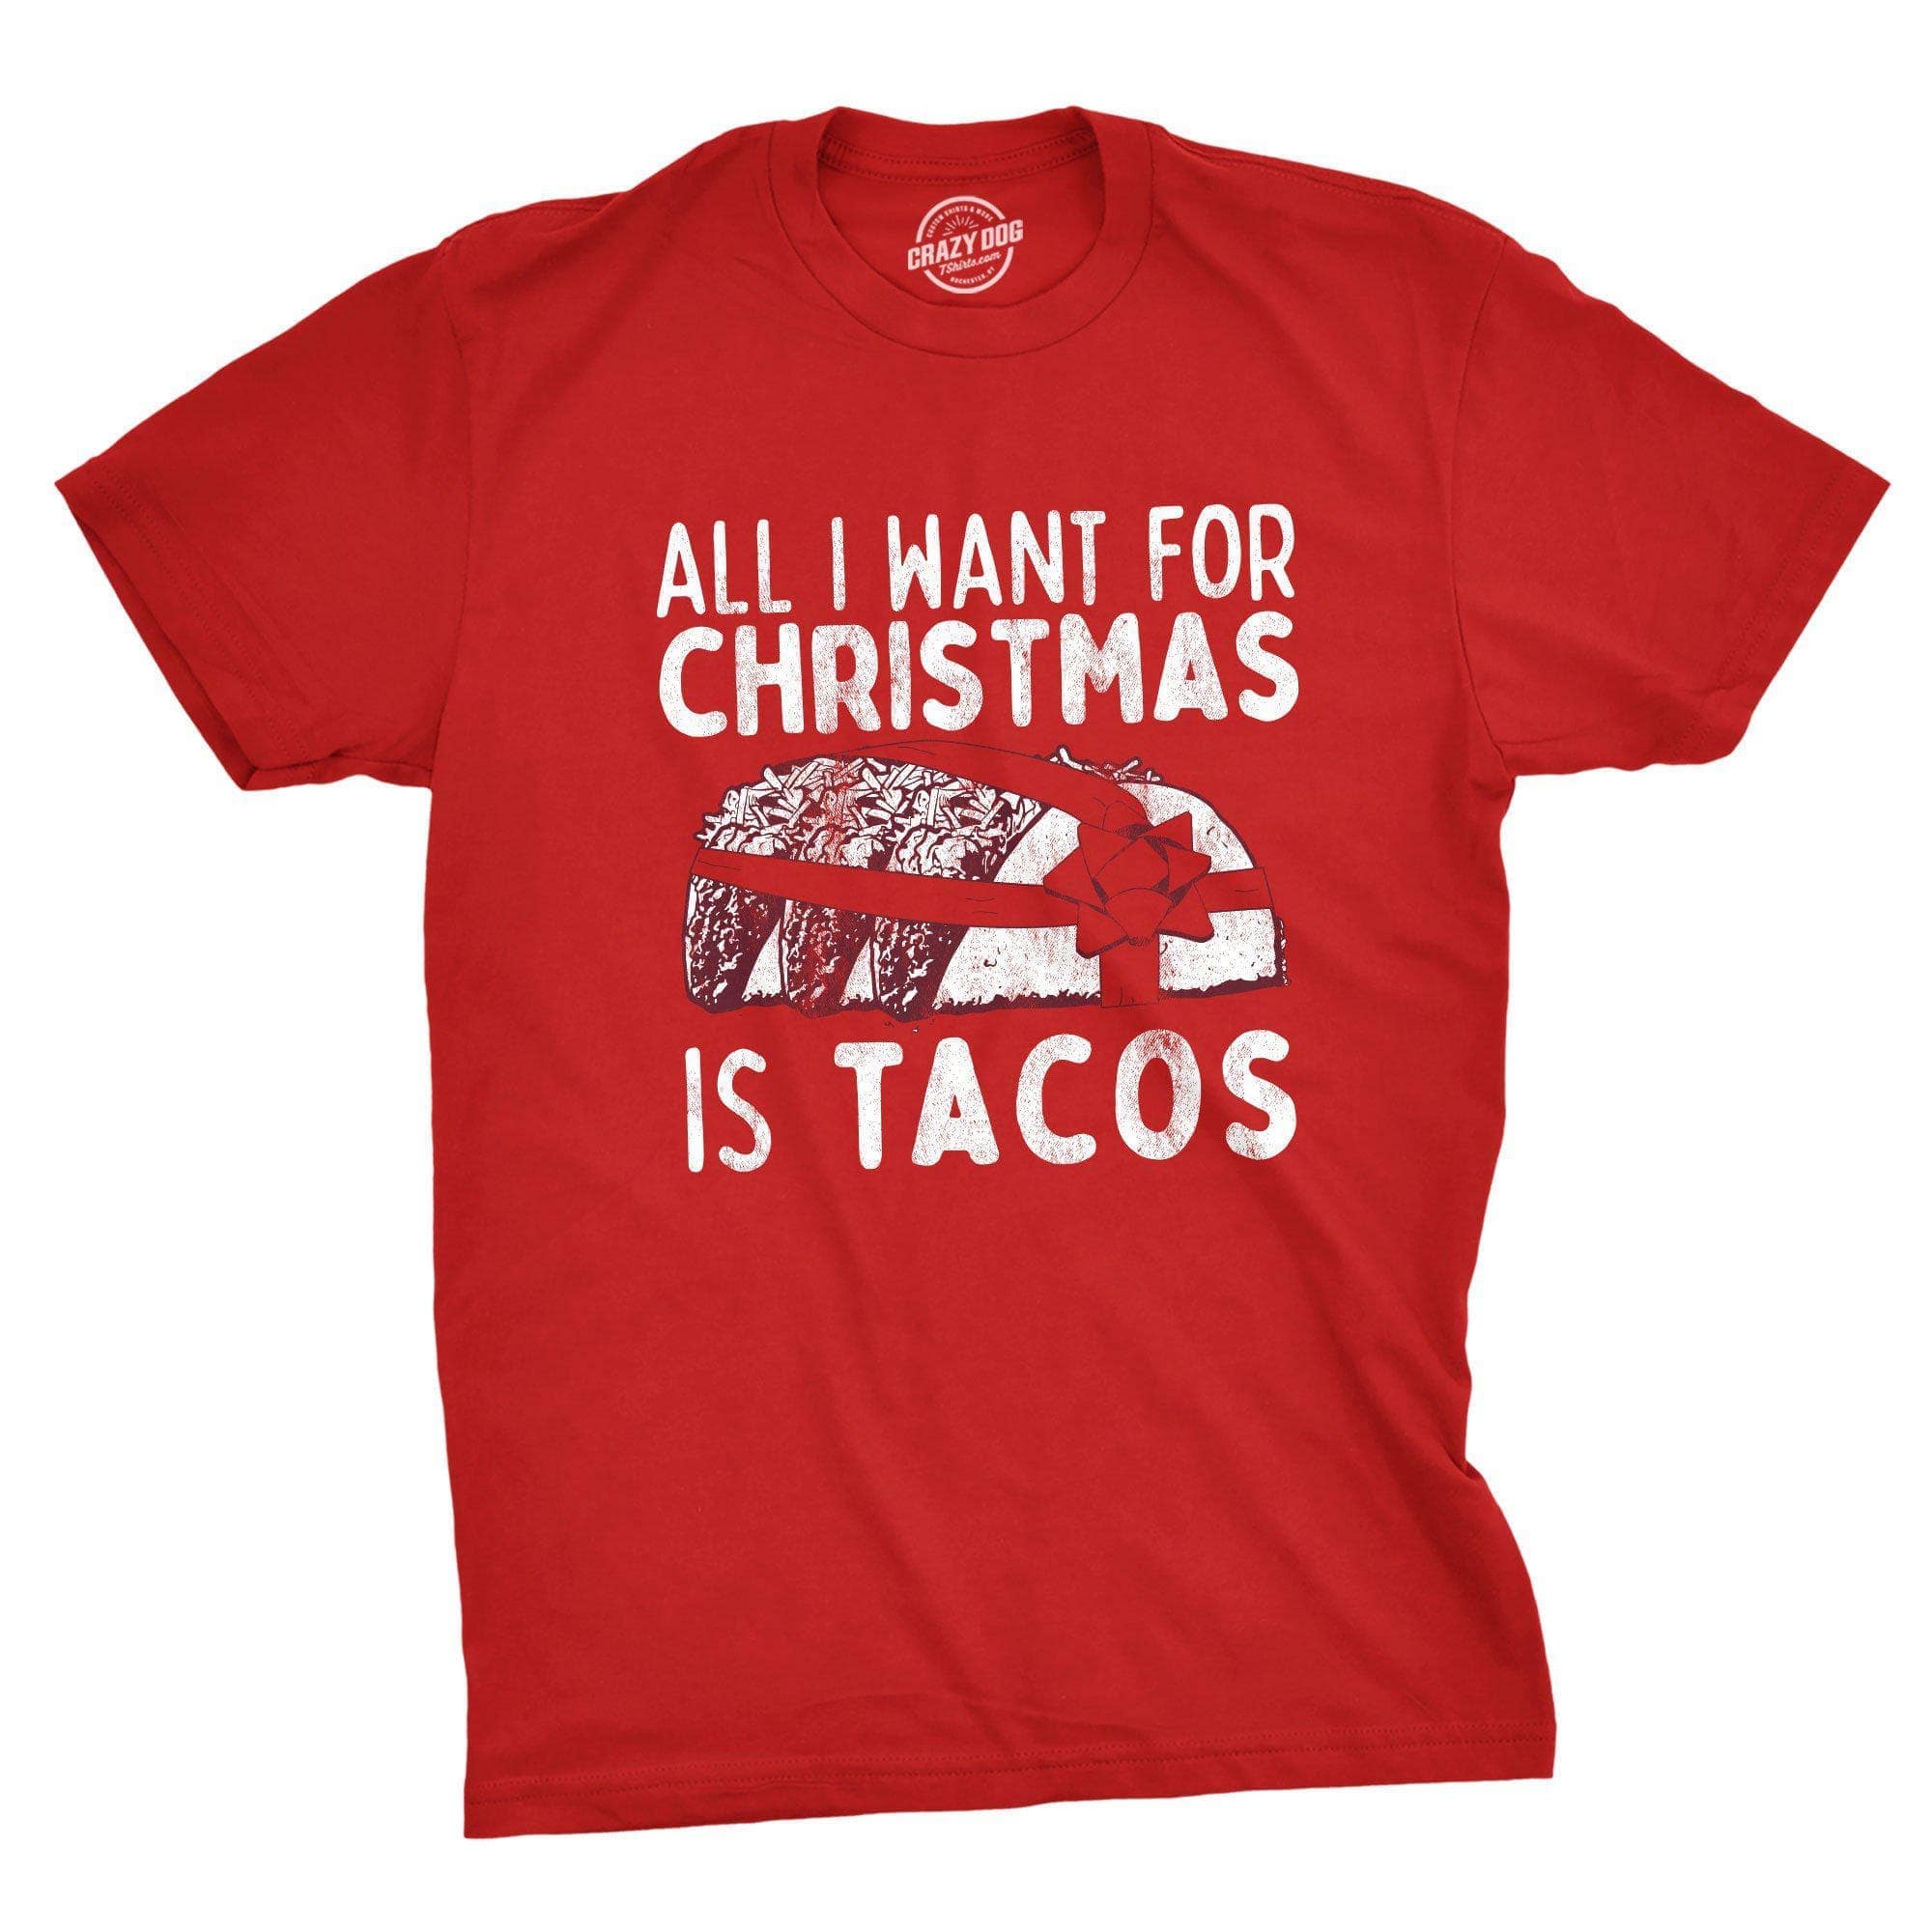 All I Want For Christmas Is Tacos Men's Tshirt - Crazy Dog T-Shirts